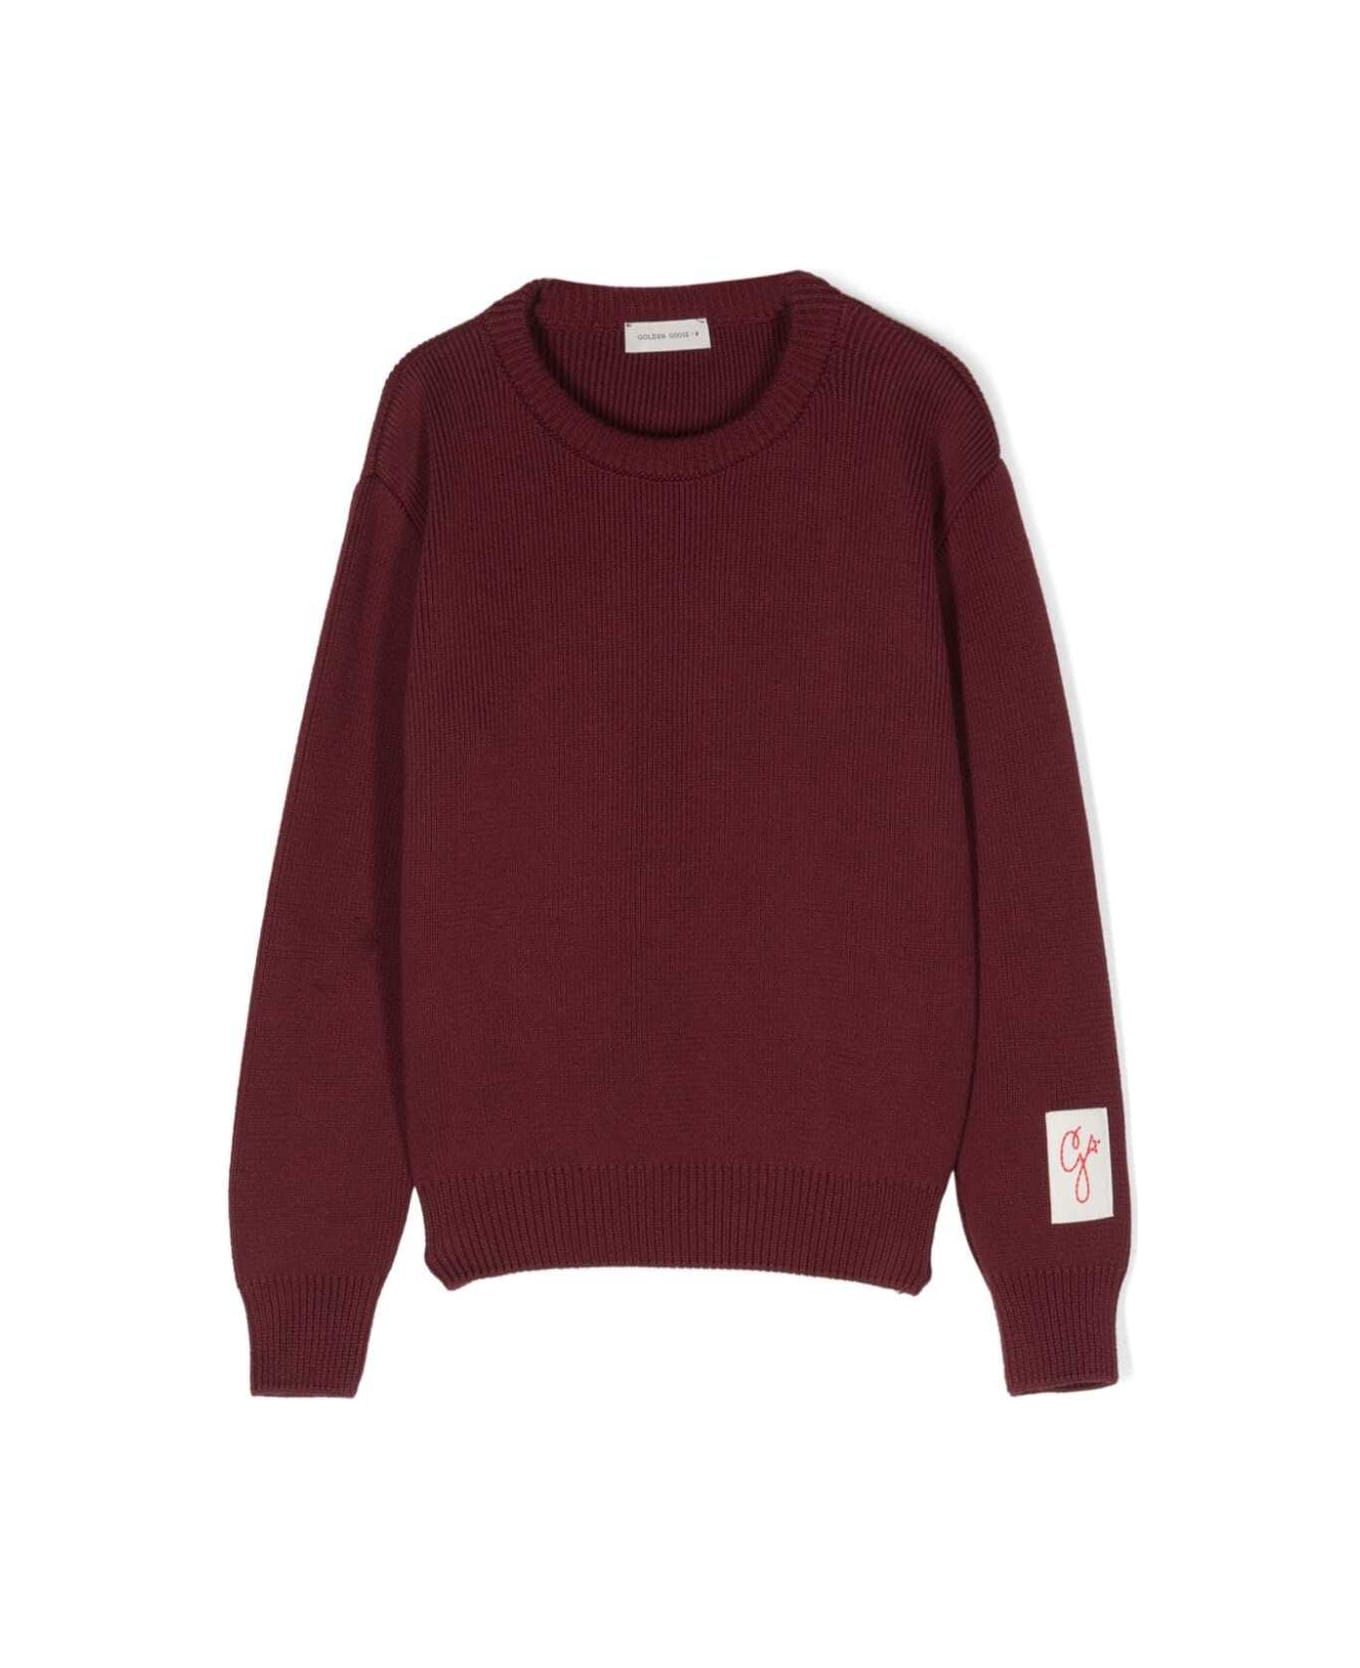 Golden Goose Golden/ Knit Regular Crewneck/ Cotton With Logo Include Il Codice Gyp01401 | P001082 -40233 - Red